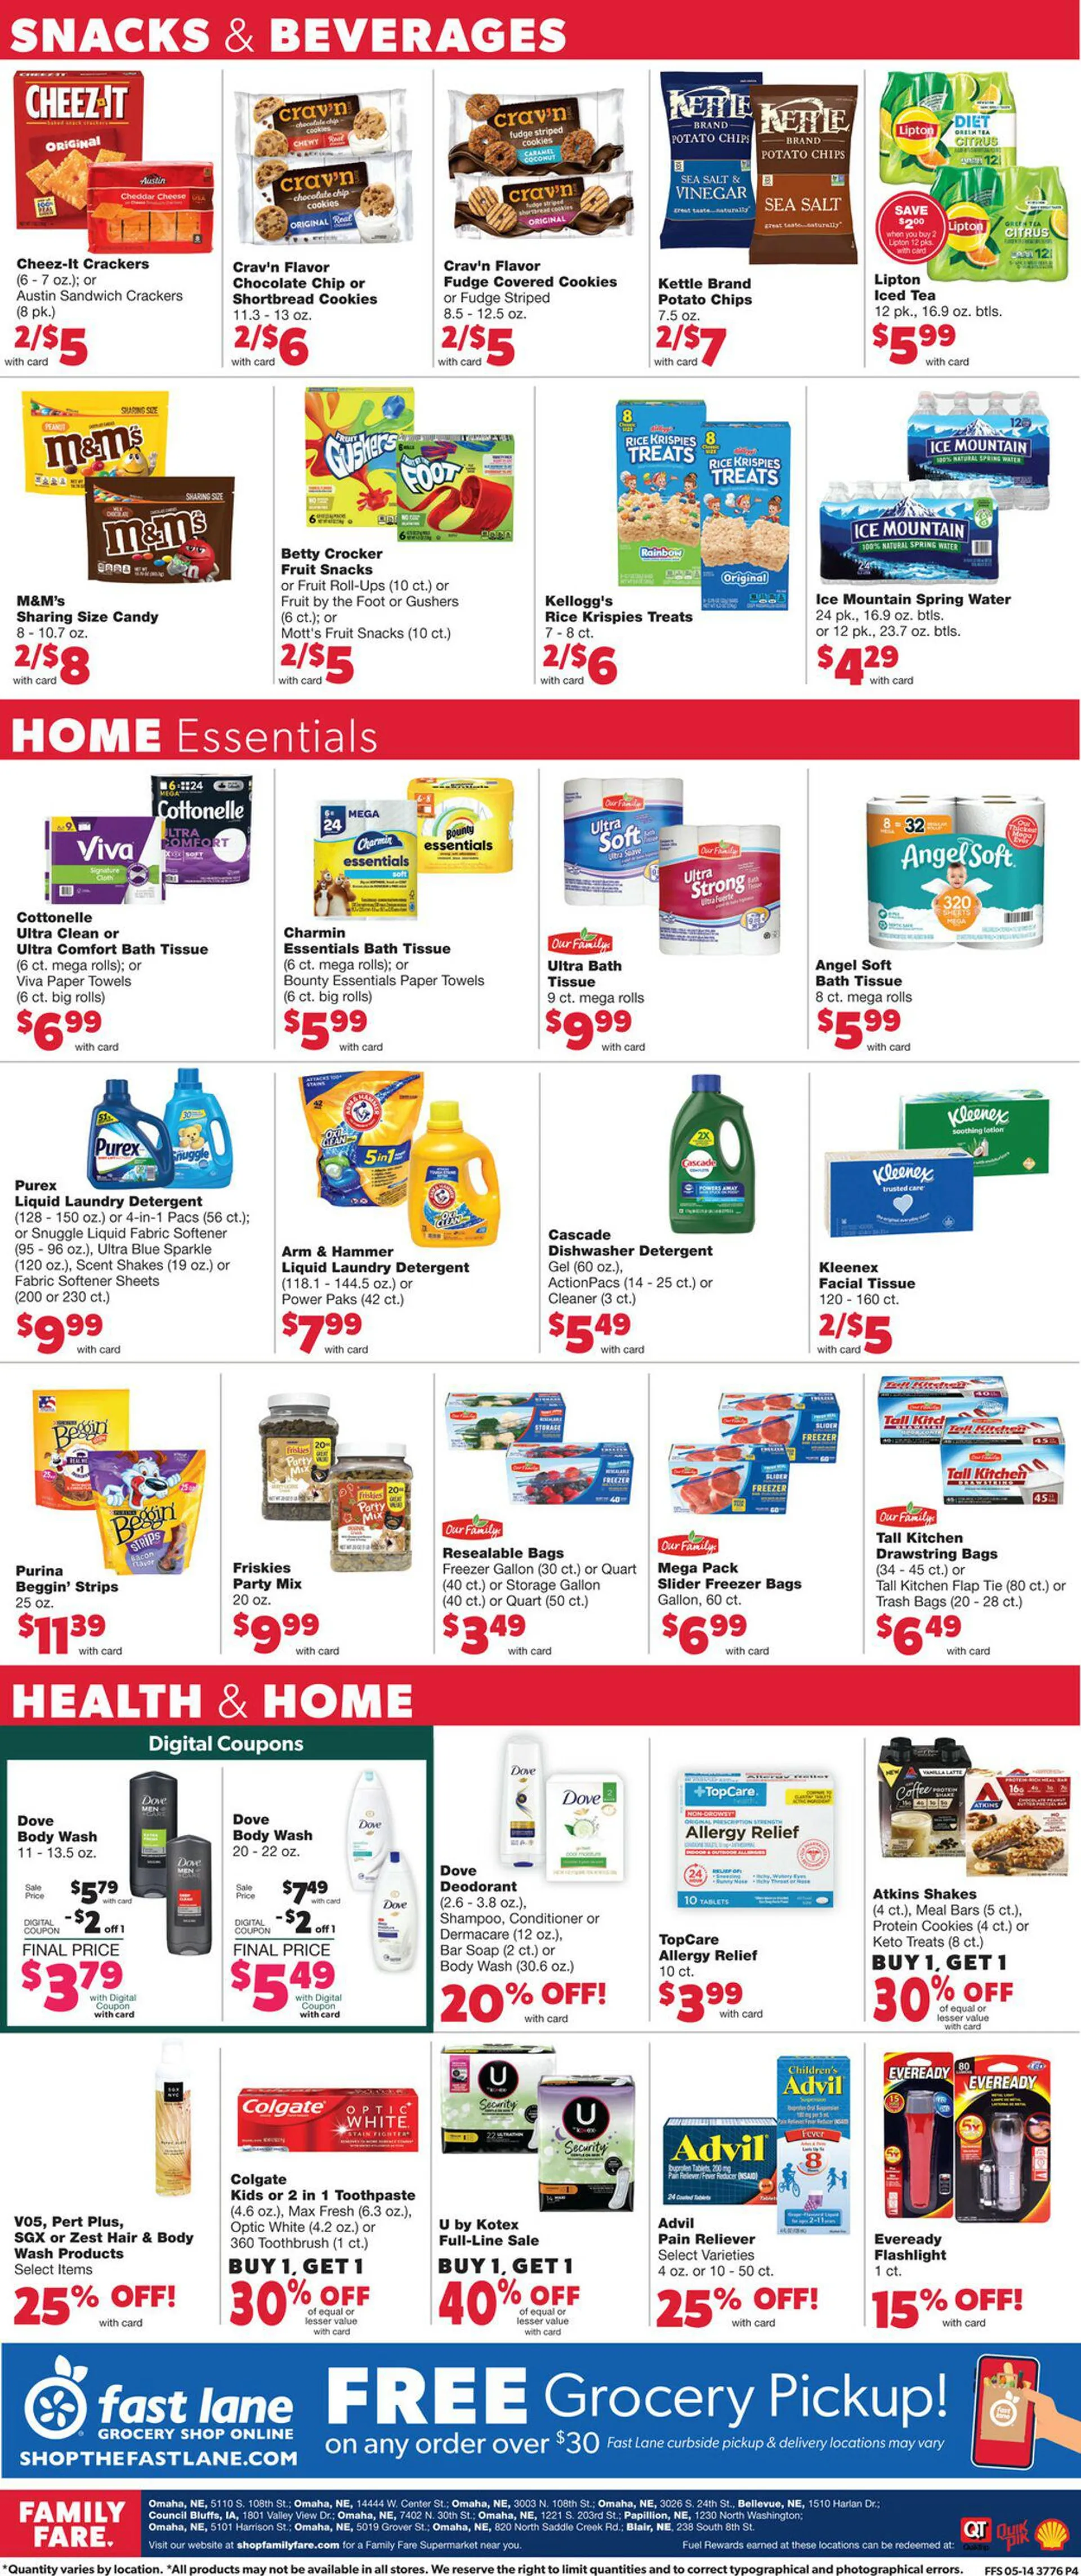 Family Fare Current weekly ad - 5